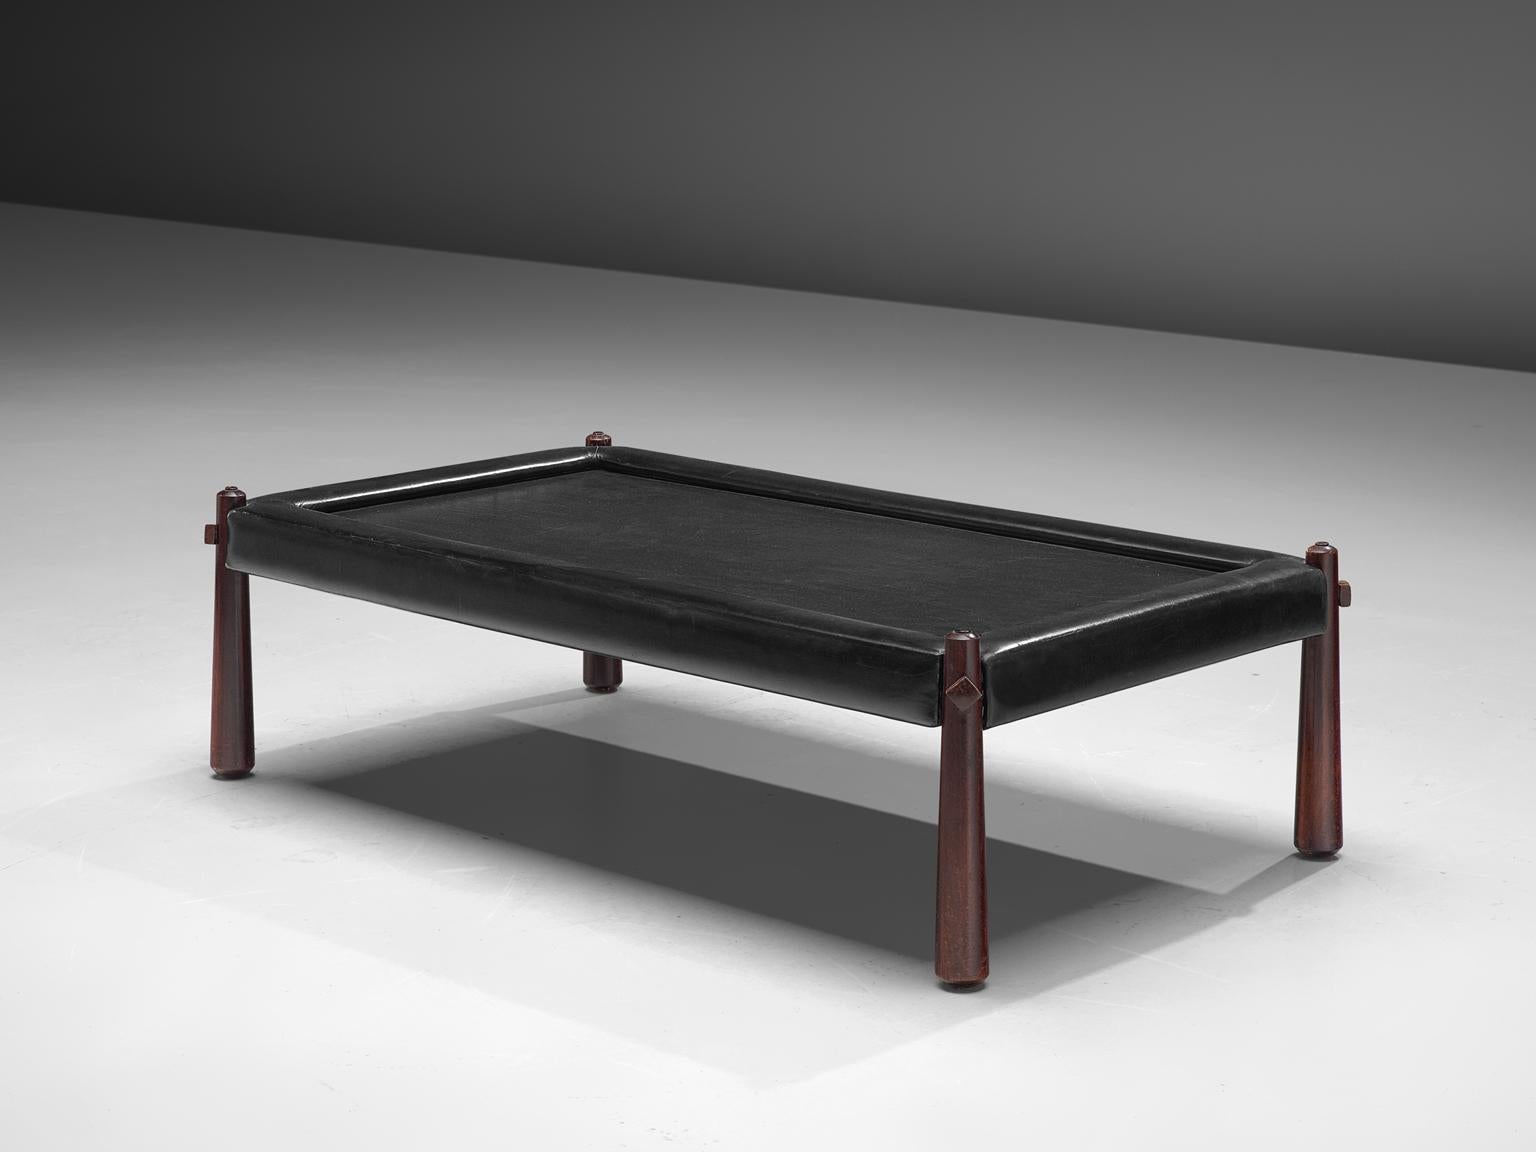 Brazilian Percival Lafer Coffee Table with Black Leather